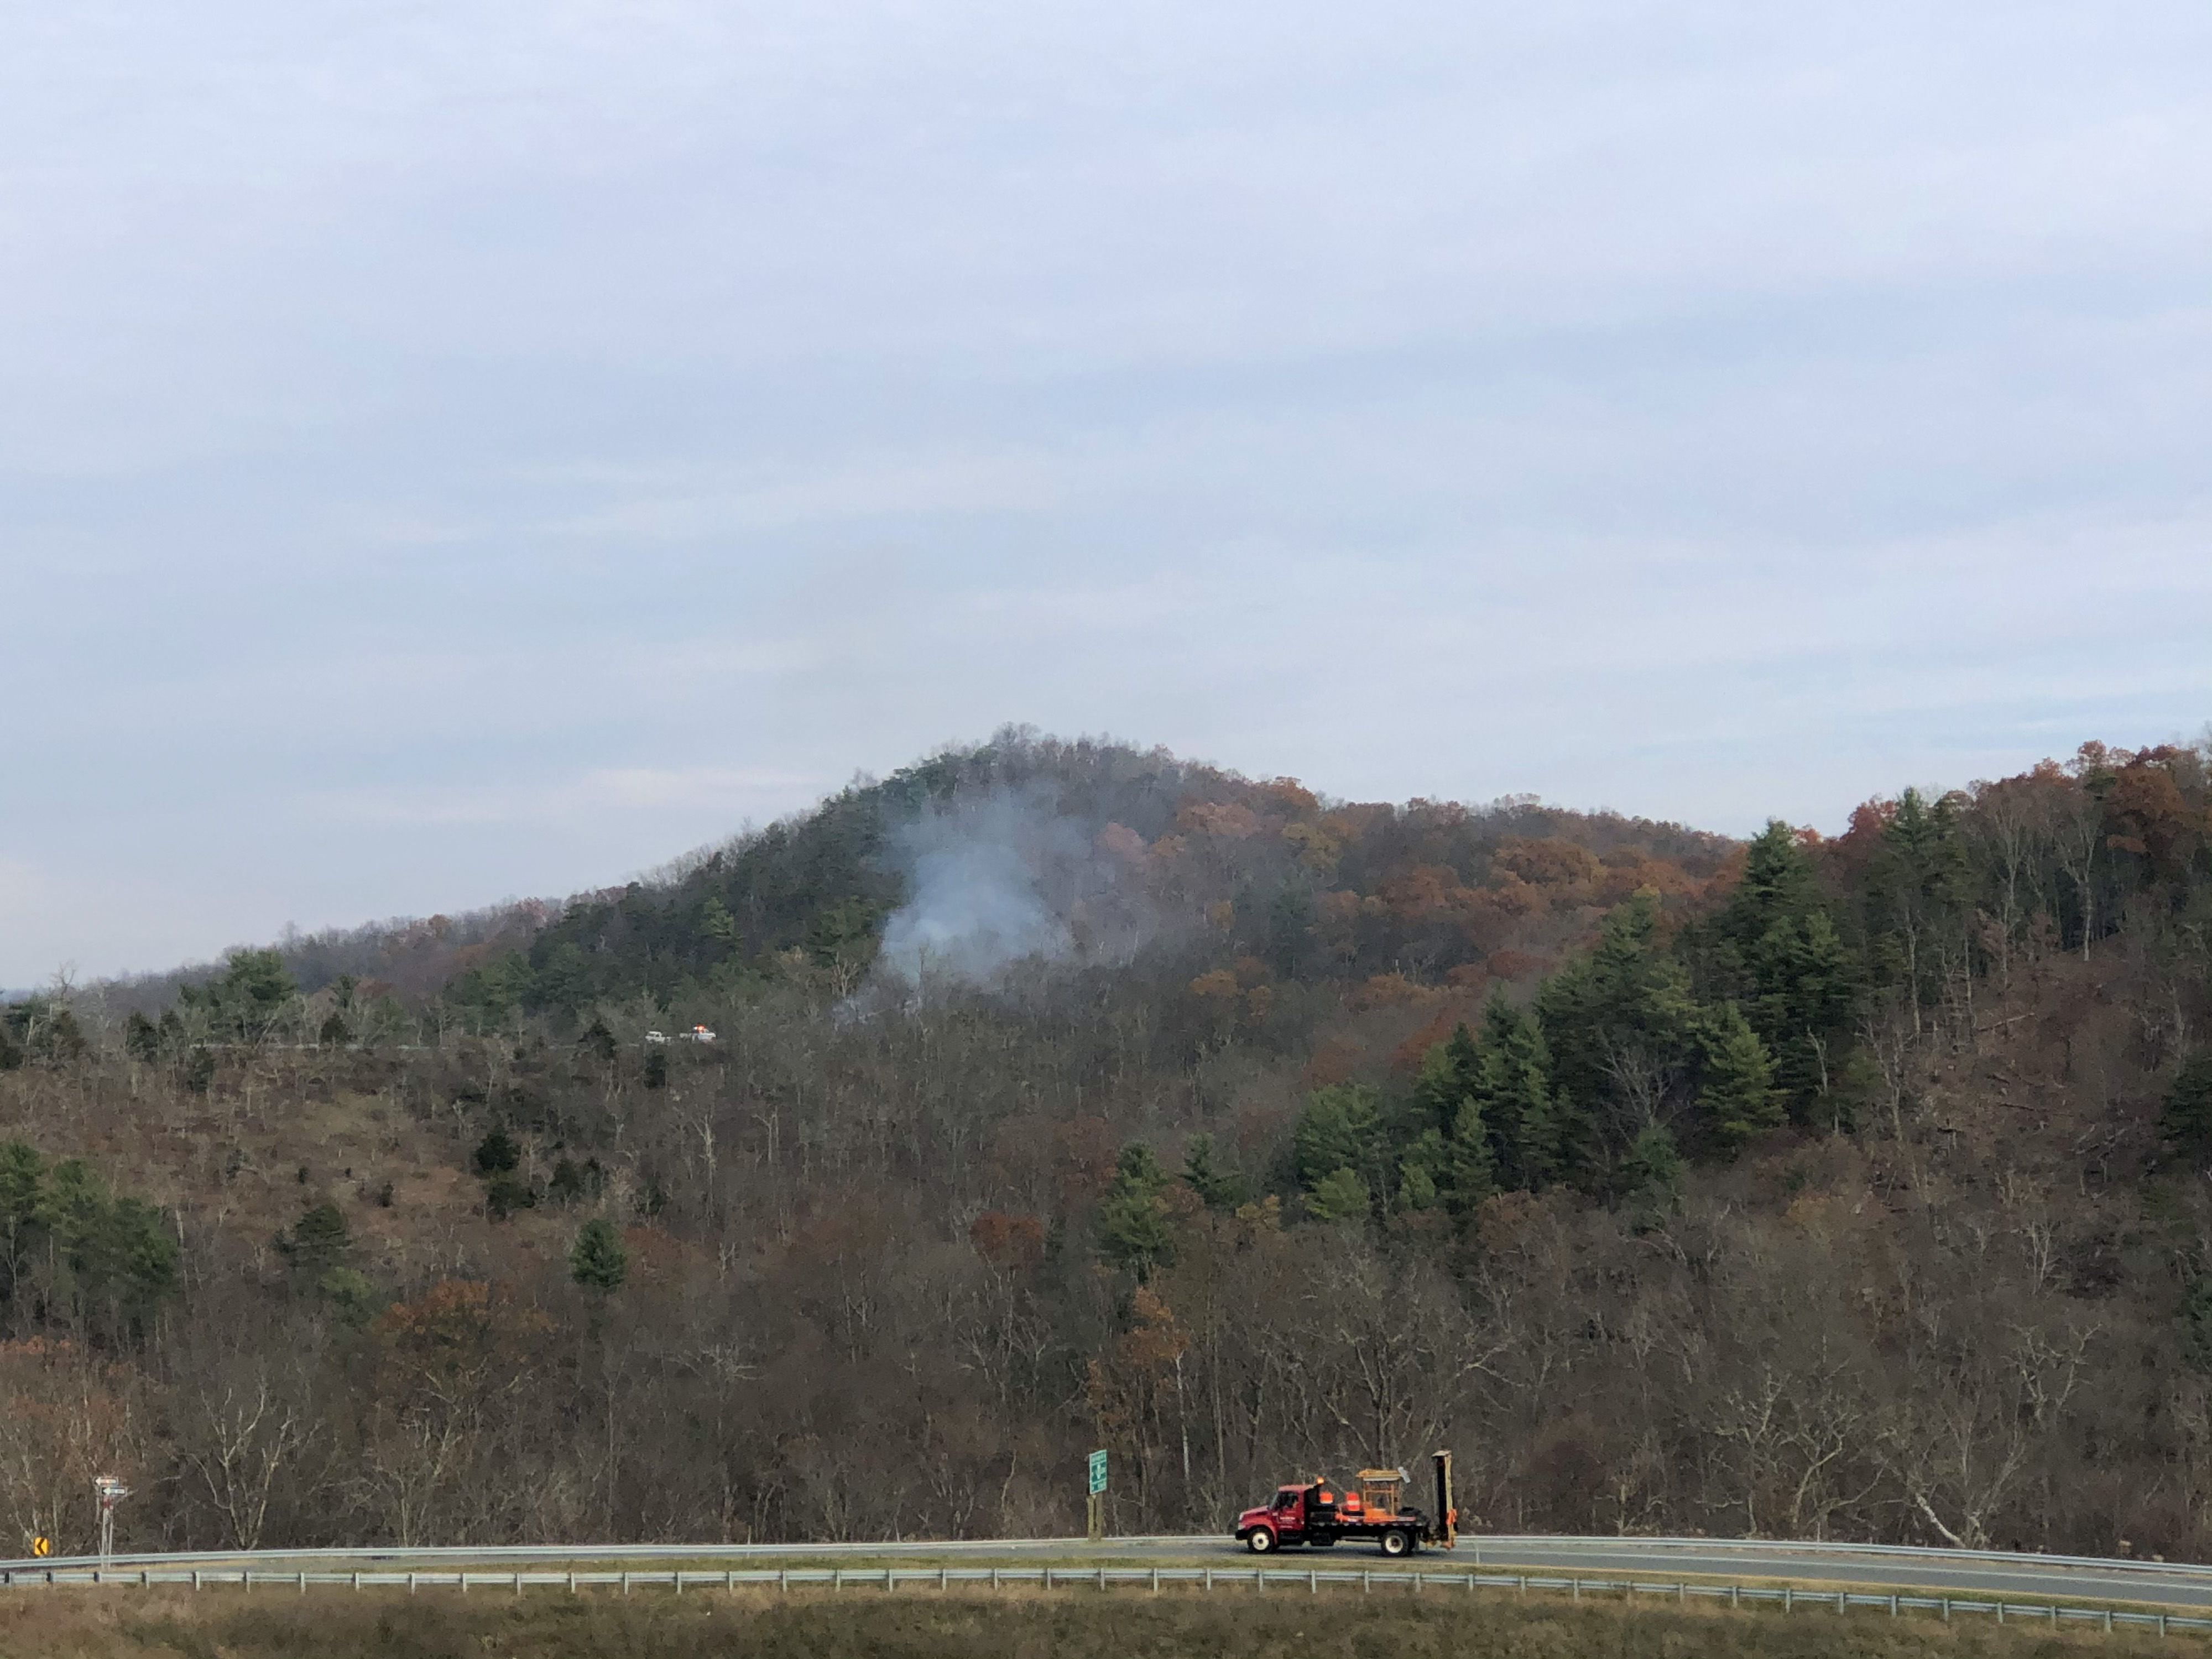 Smoke from a controlled burn rises above a green forested hill as cars drive by on the interstate highway that runs along the edge of the forest.